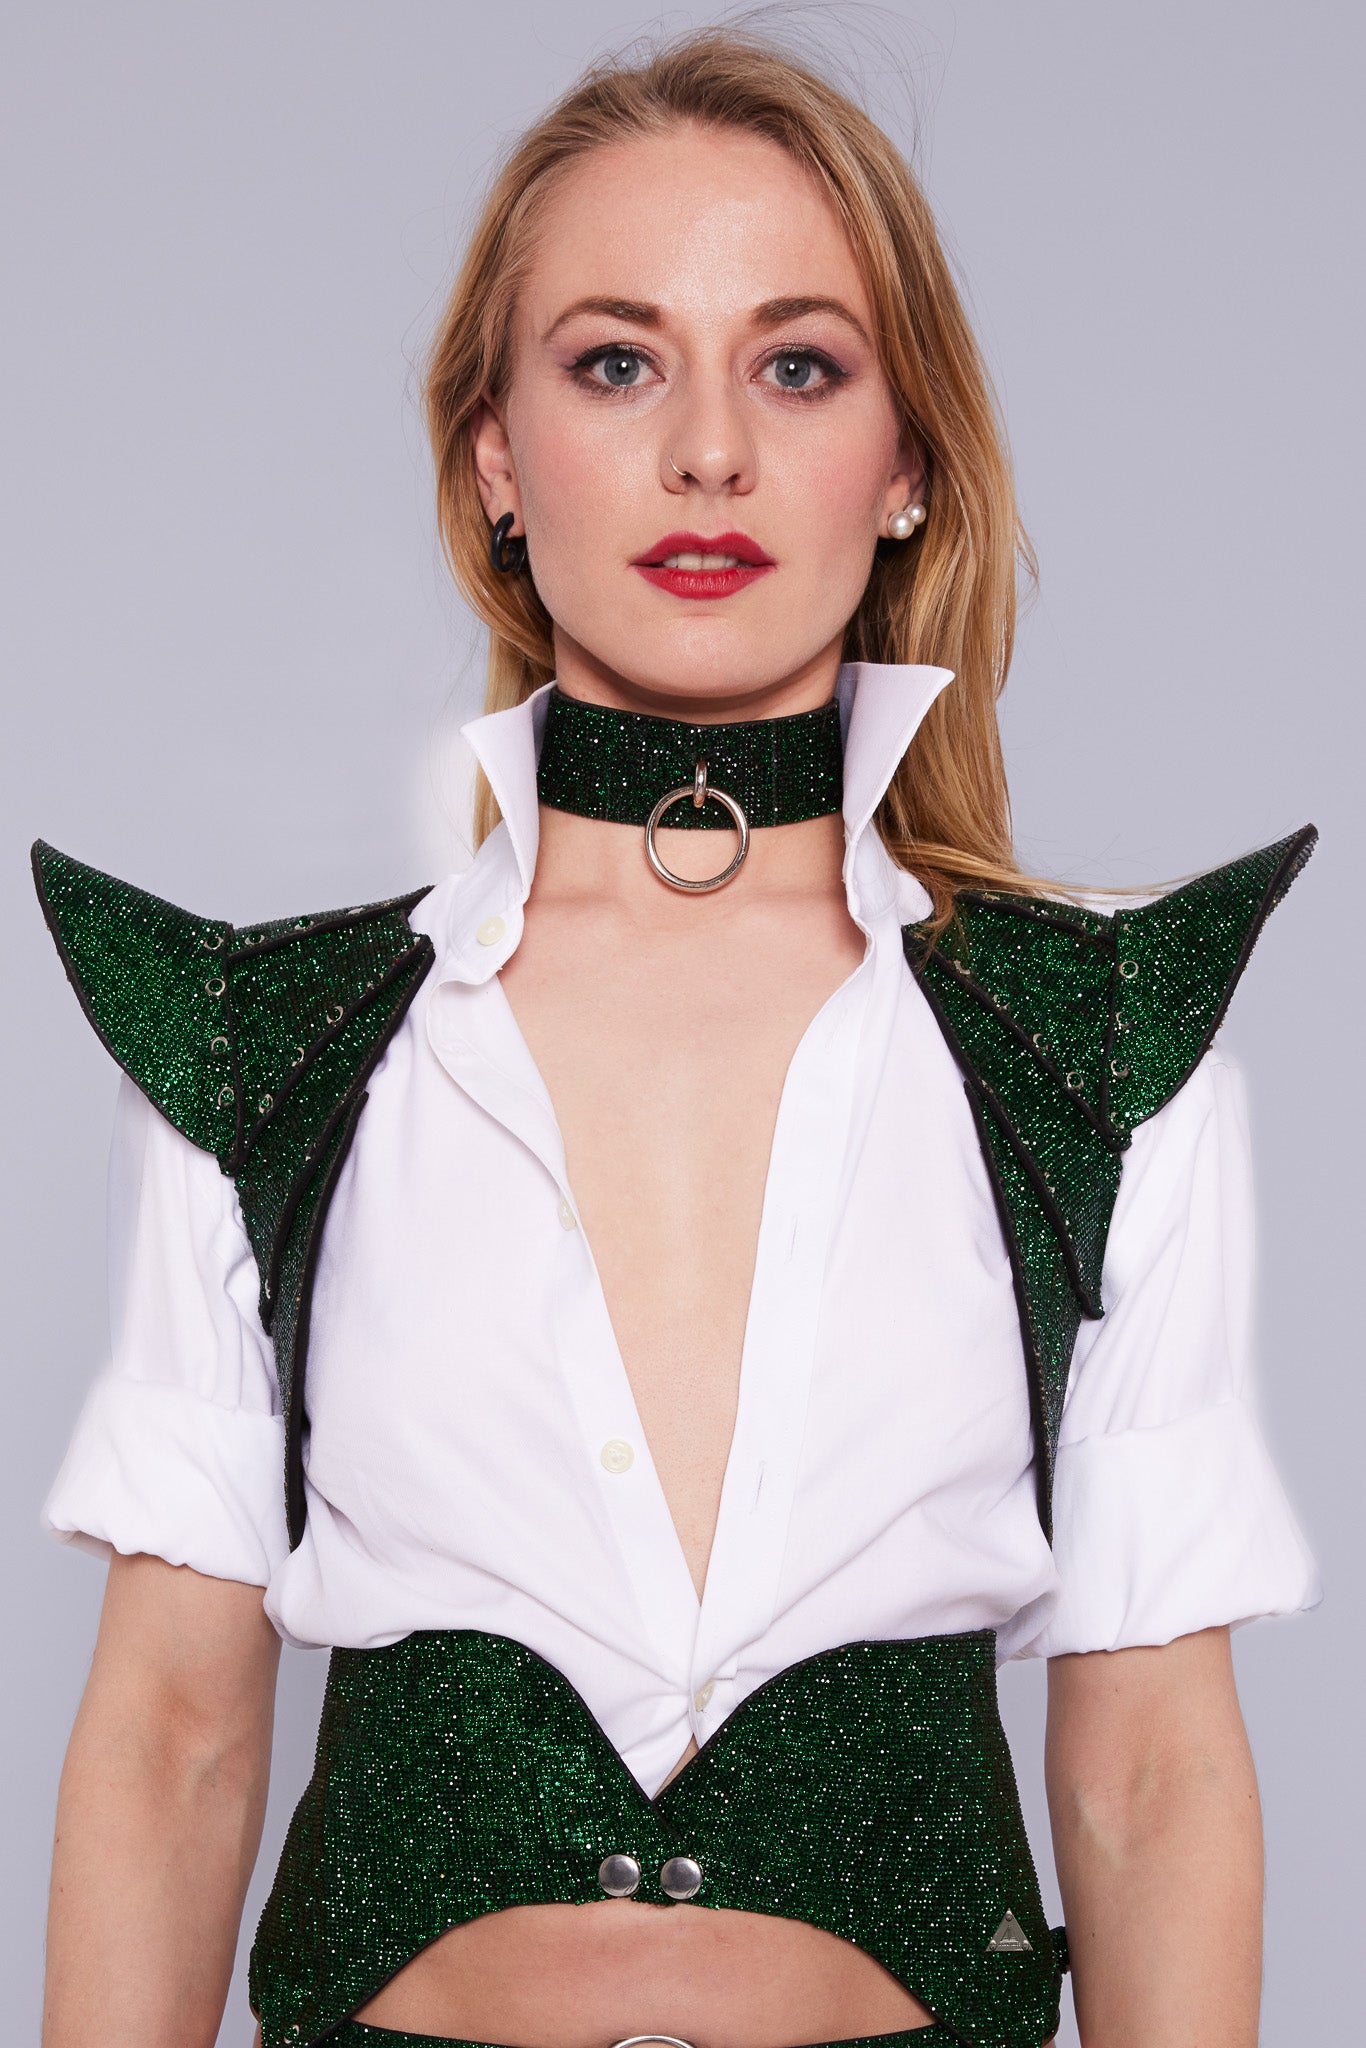 Radiant PAGODA Jacket featuring shimmering emerald green crystals, adding a touch of sparkle to your look